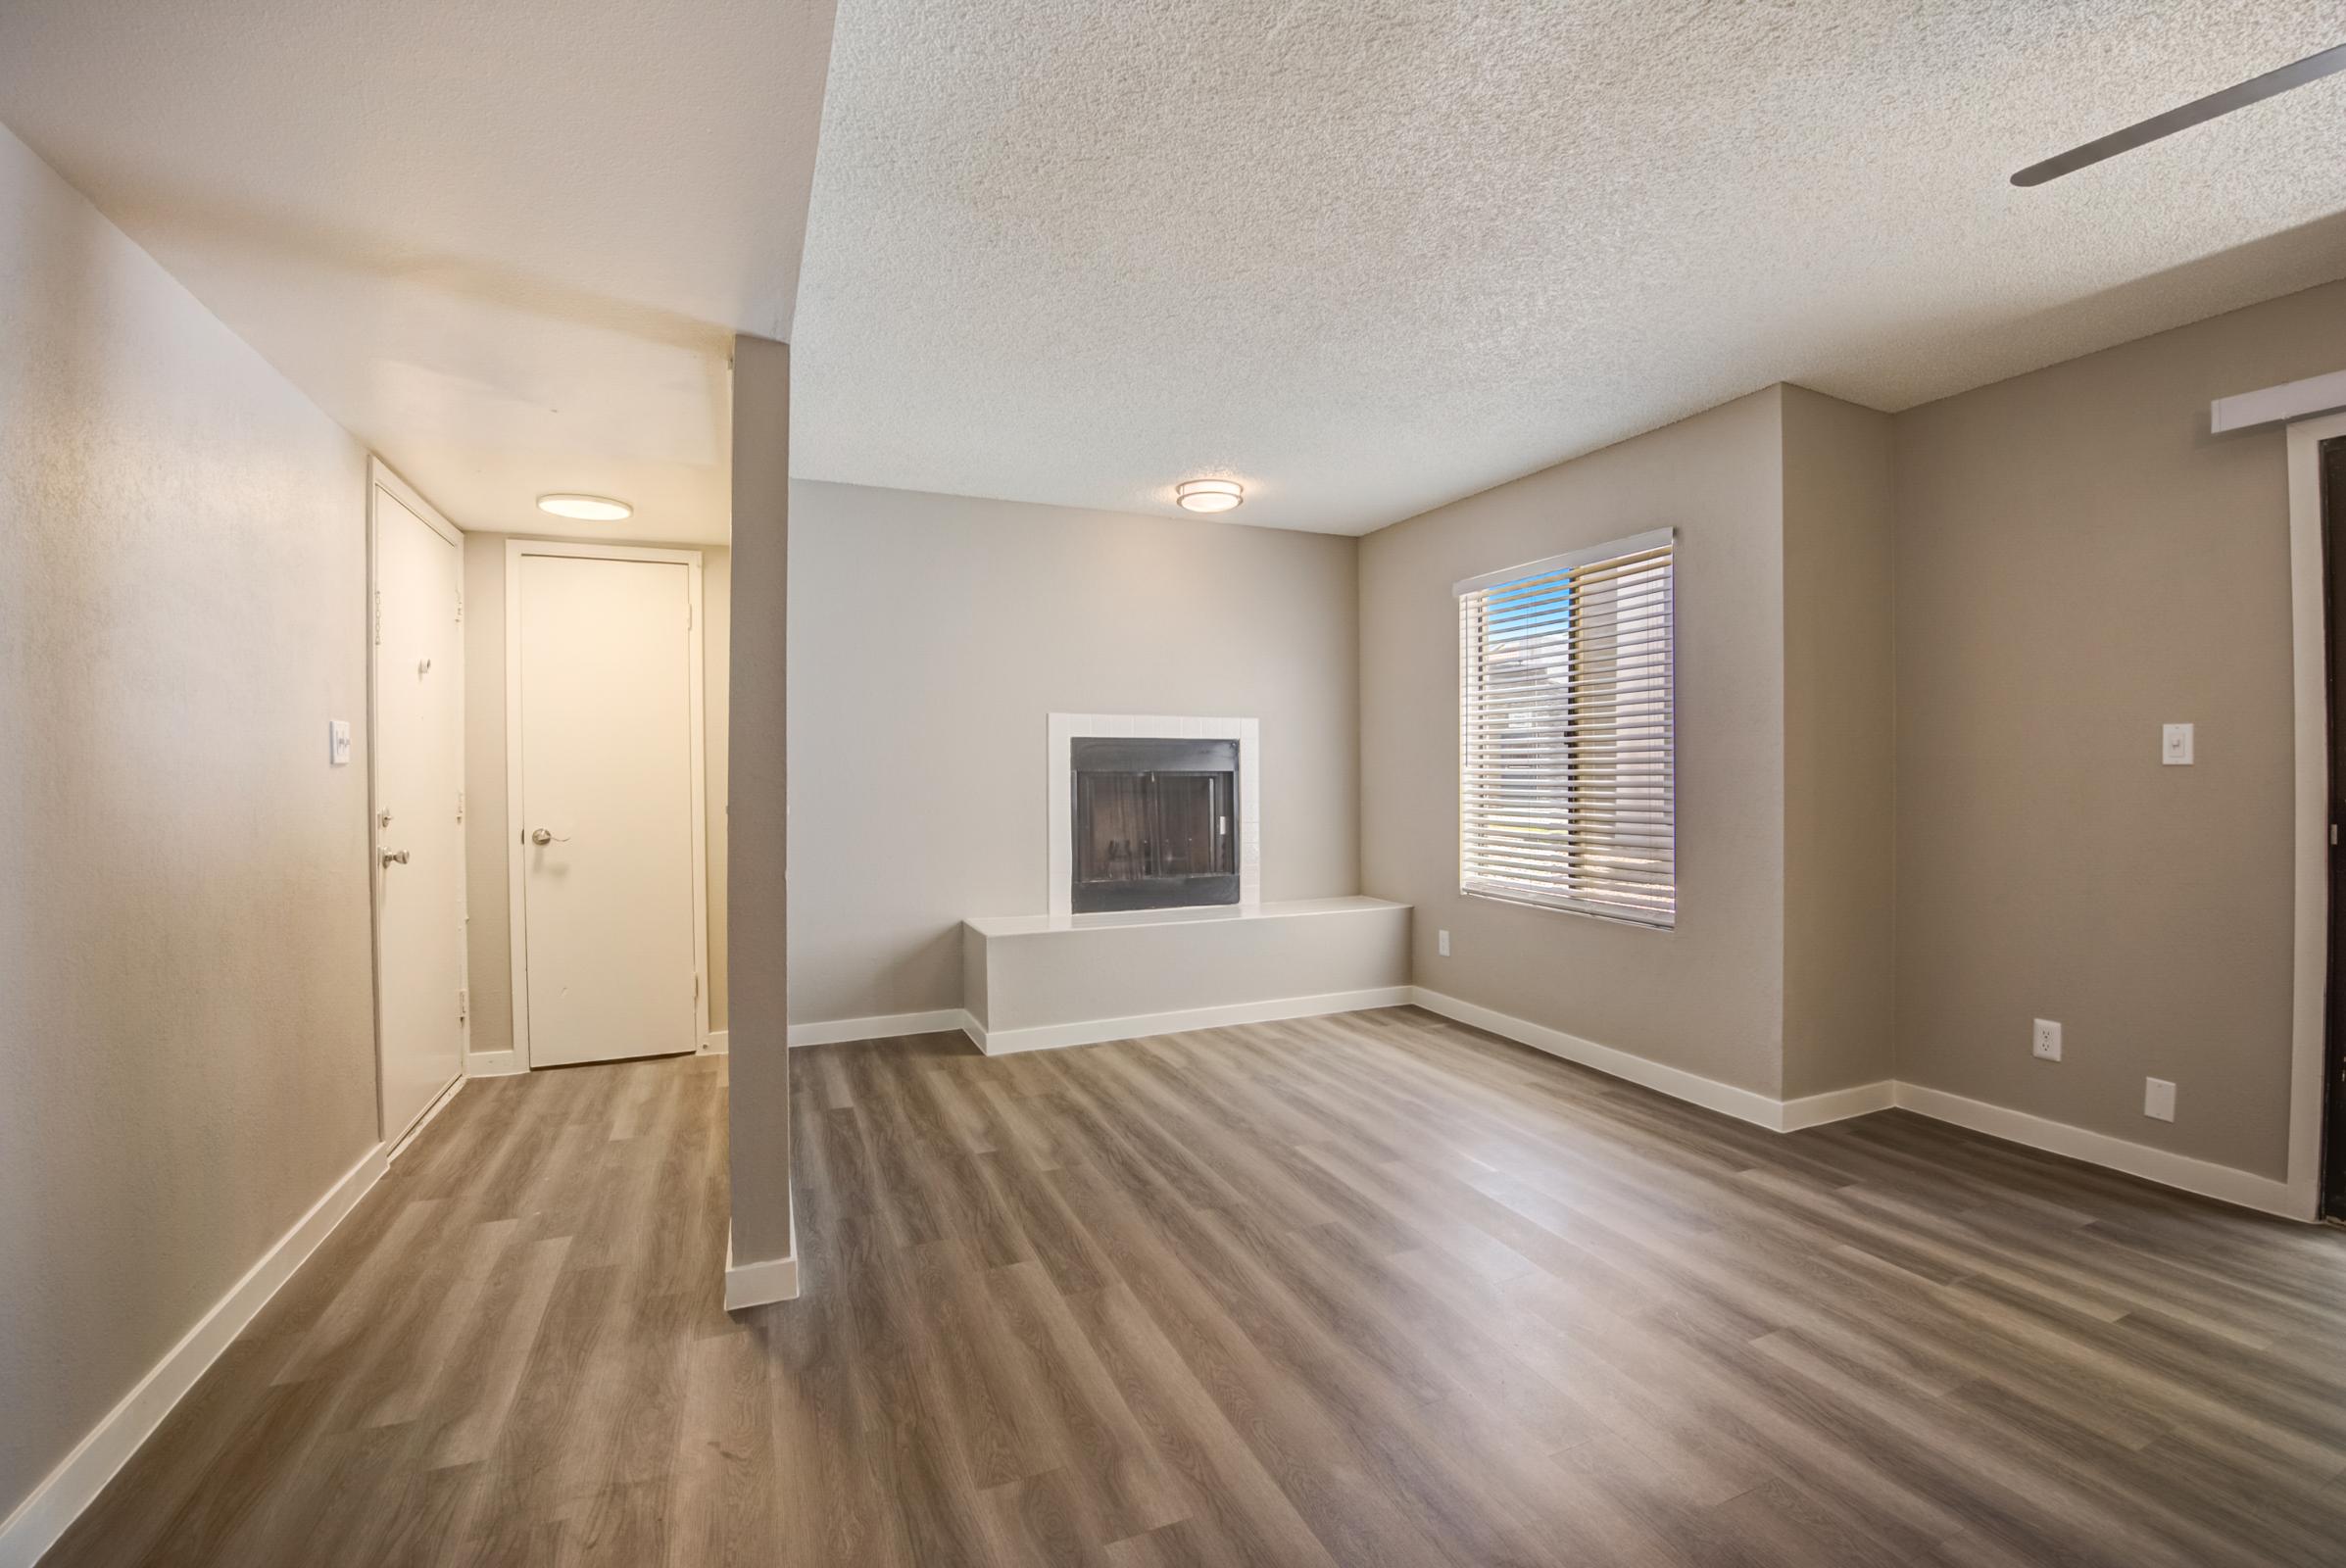 A hallway and living room with wood-style flooring at Rise at the Meadows.